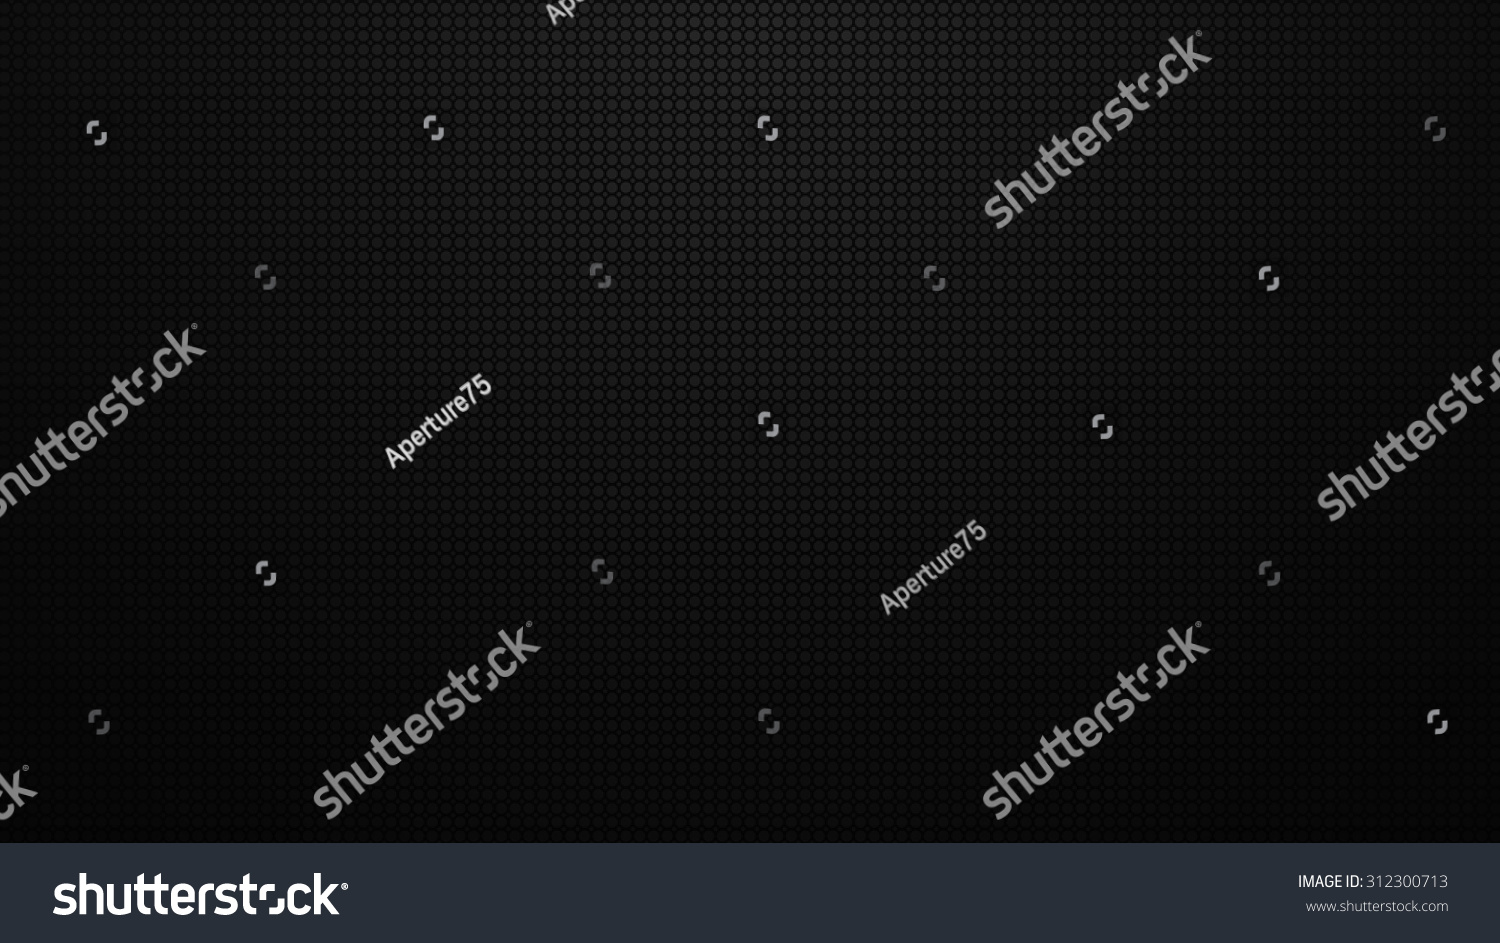 Black And White Grid Background. Stock Photo 312300713 : Shutterstock